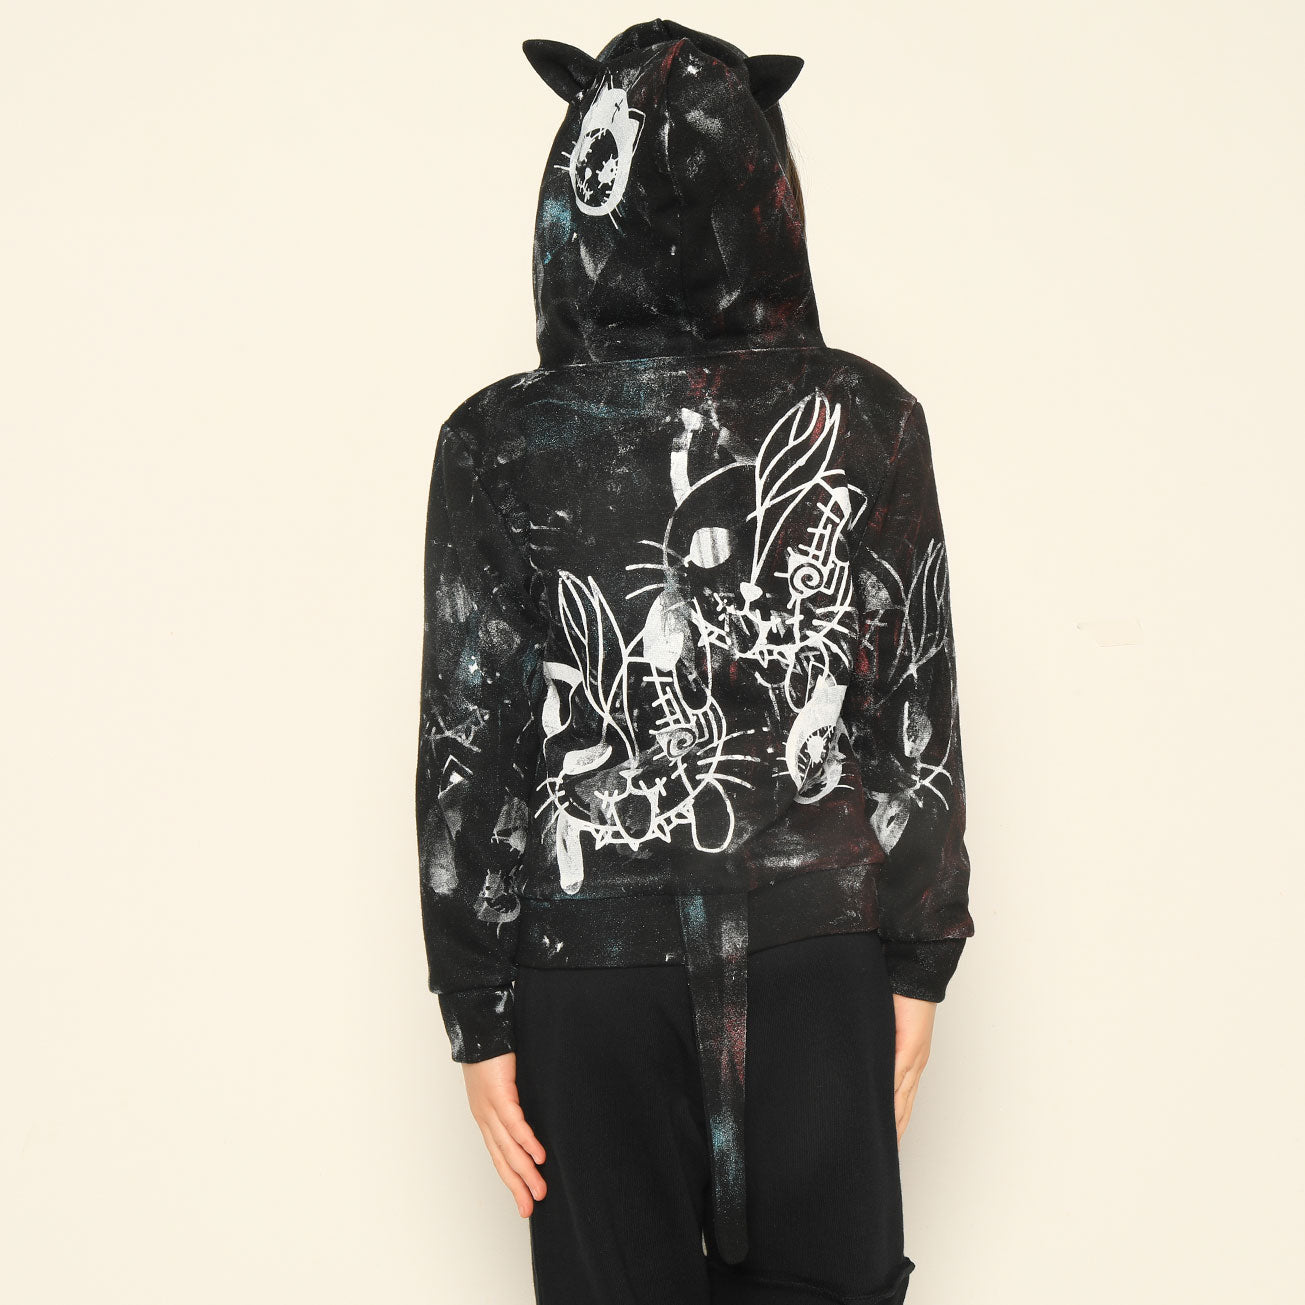 HANGRY & ANGRY CRASH PAINT HOODIE (2 sizes)